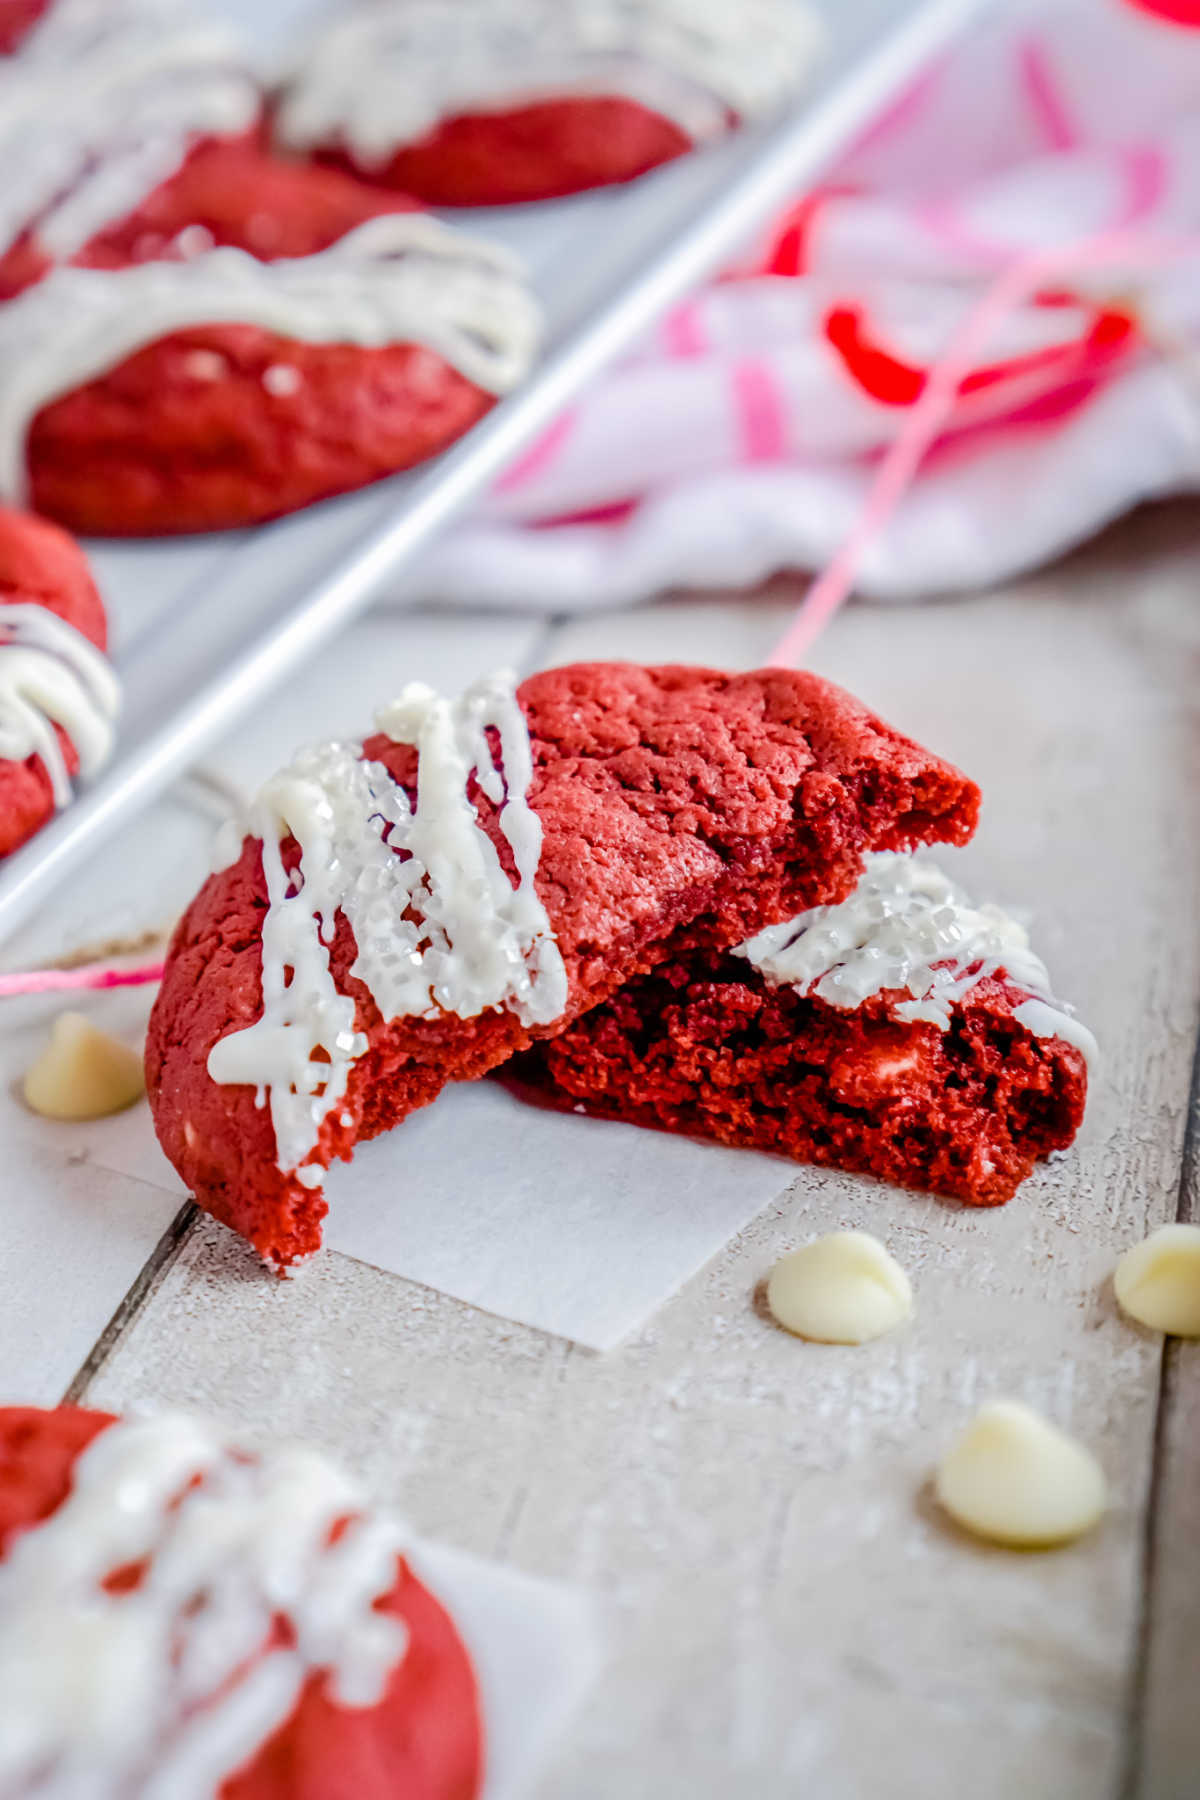 A chewy Red Velvet Cookie broken in half sitting on a table with white chocolate chips all around.